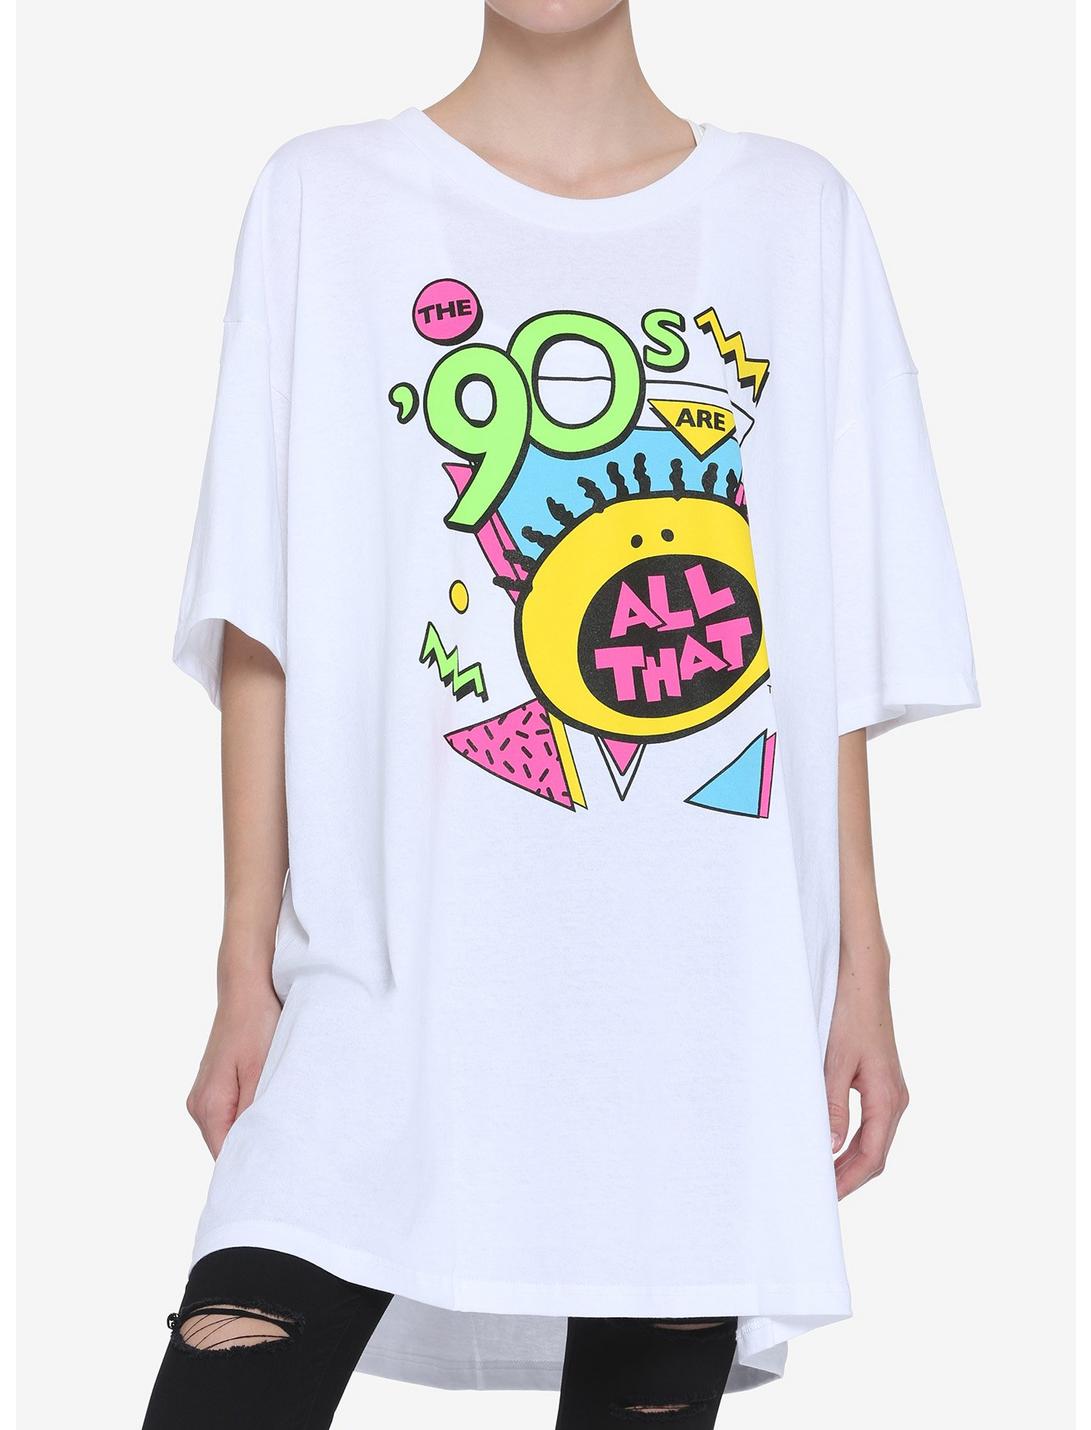 The 90s Are All That Logo Oversized Girls T-Shirt, MULTI, hi-res